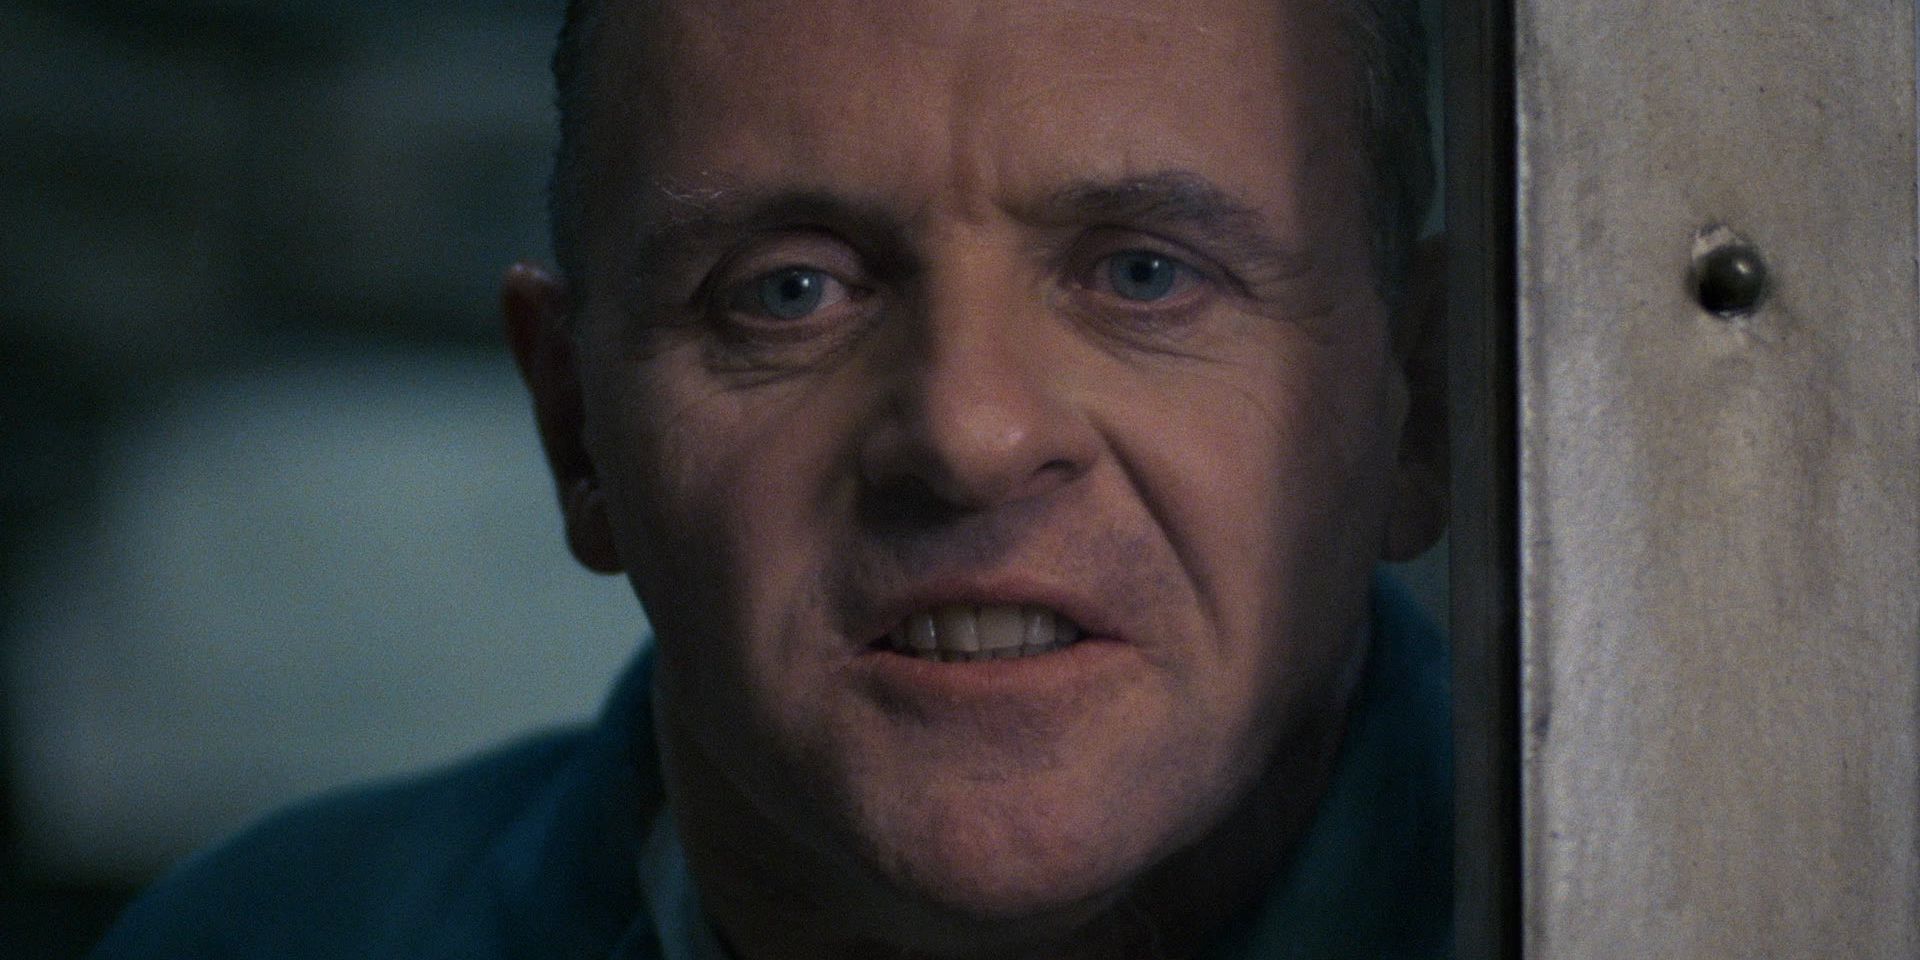 The Silence of the Lambs - Hannibal Lecter